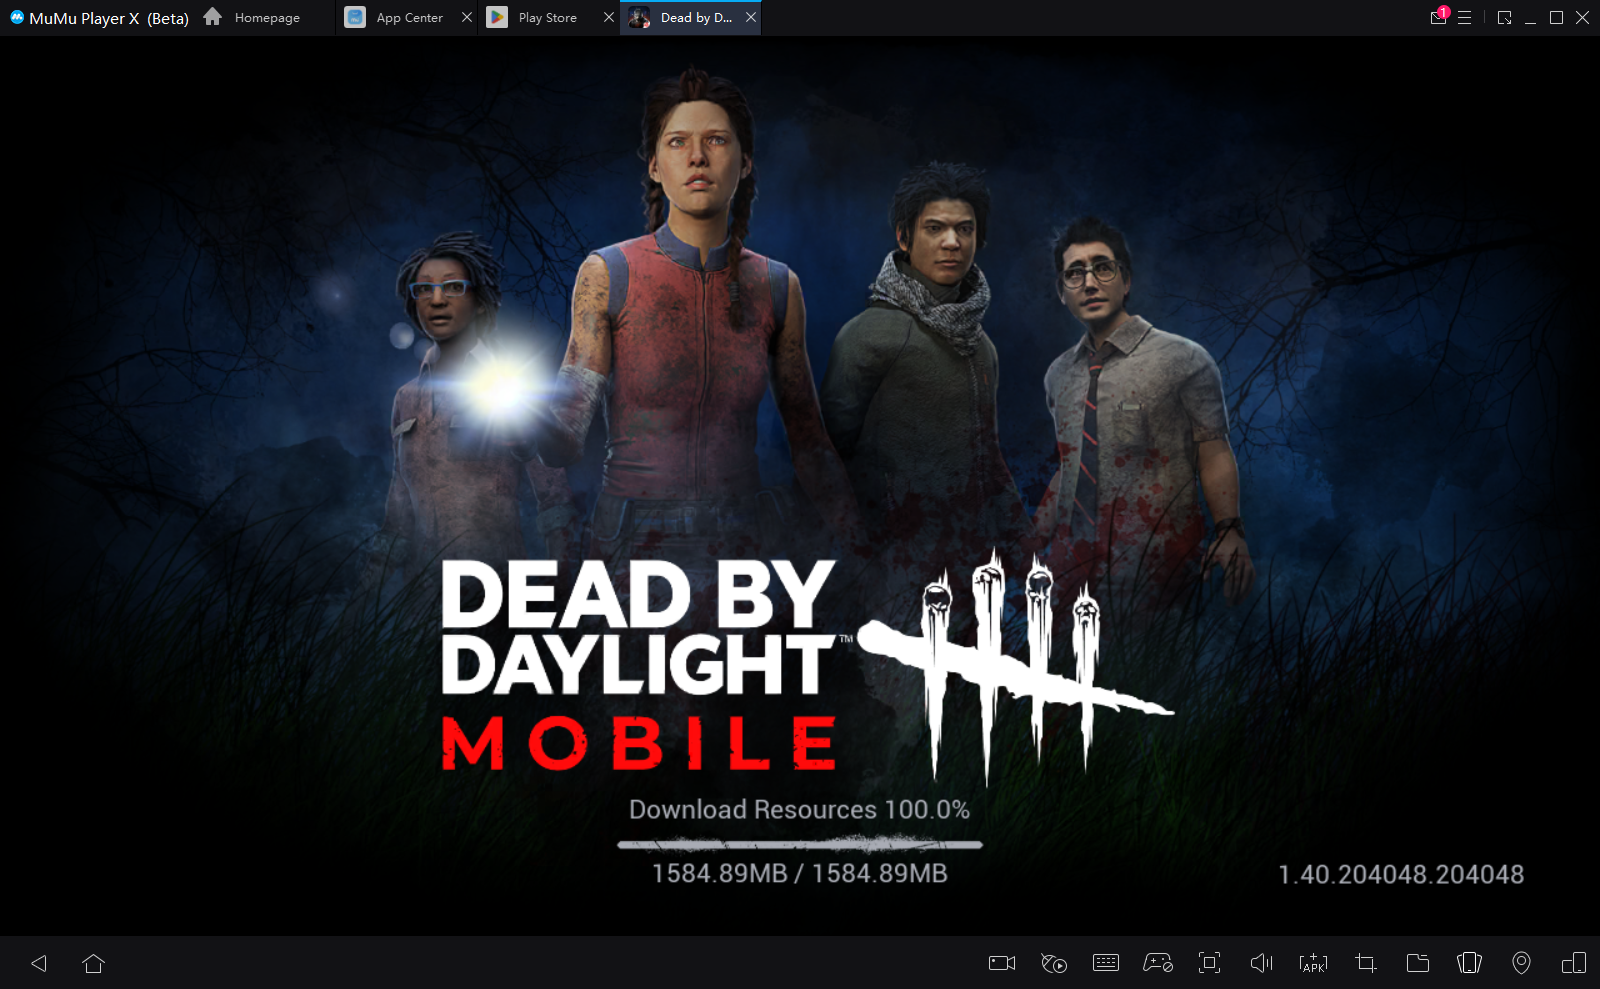 Download and play DeadTubbies Online on PC with MuMu Player